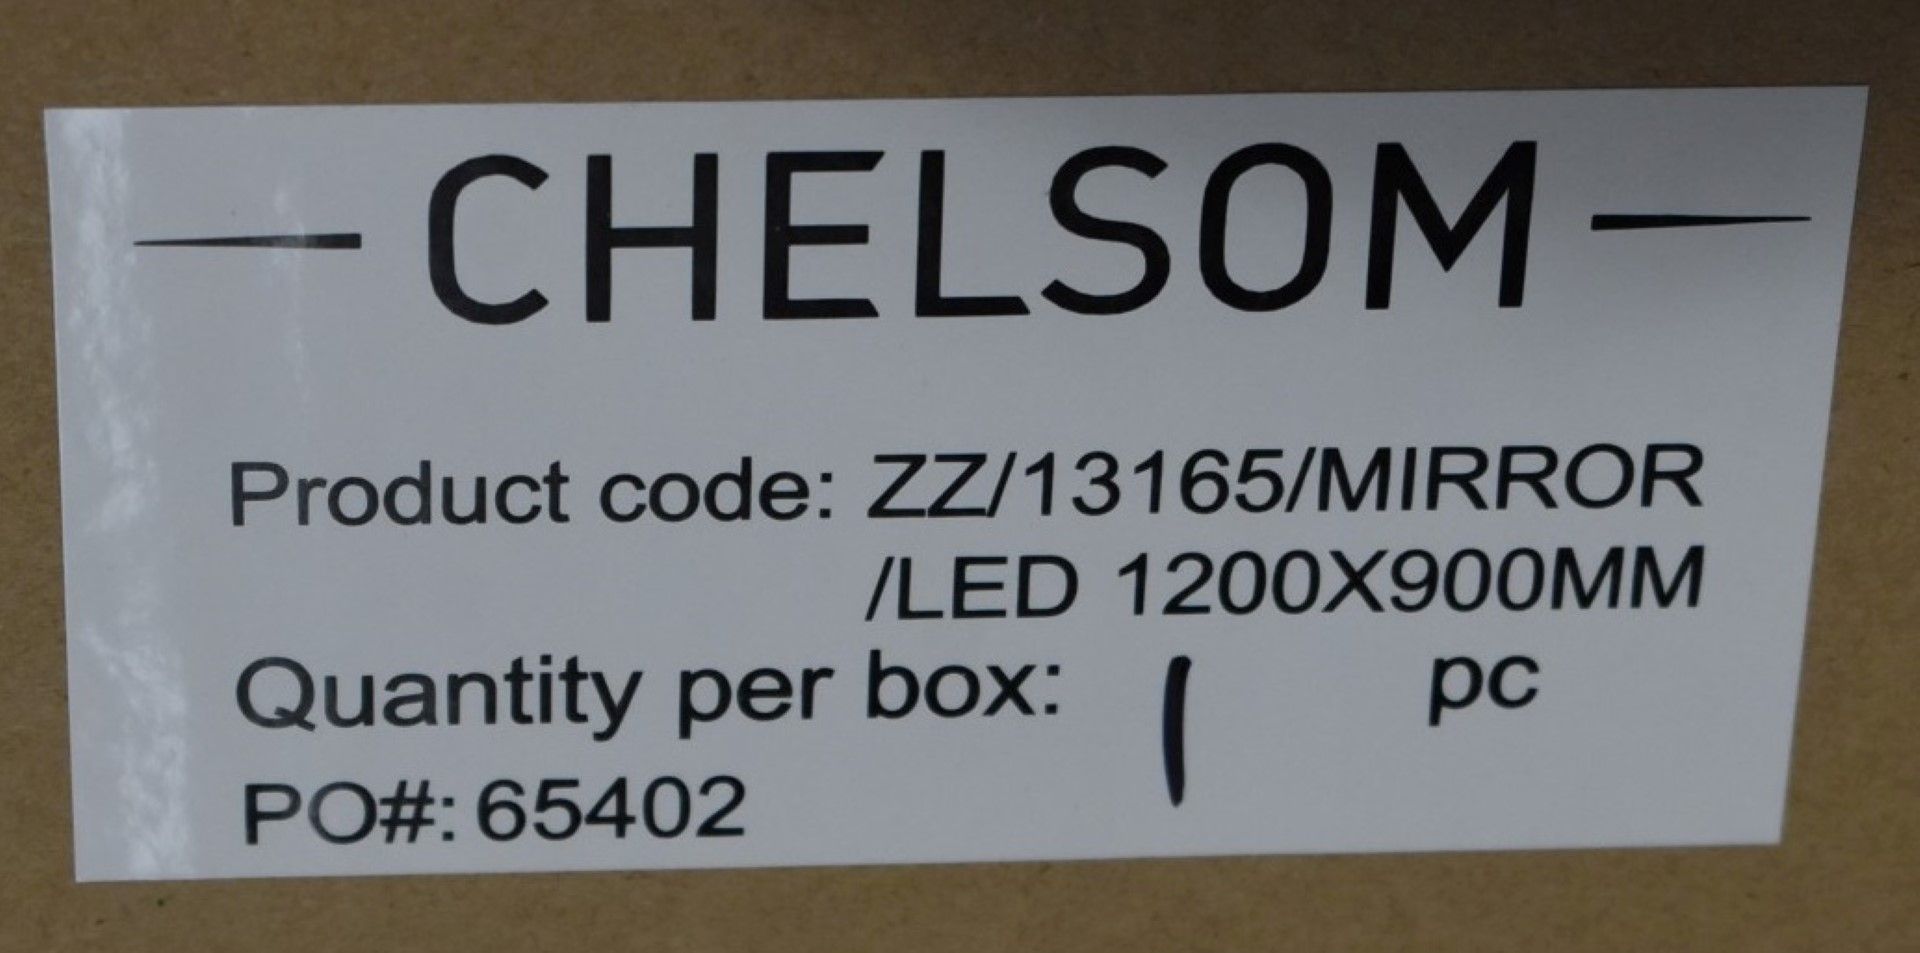 1 x Chelsom Large Illuminated LED Bathroom Mirror With Demister - Brand New Stock - As Used in Major - Image 3 of 14